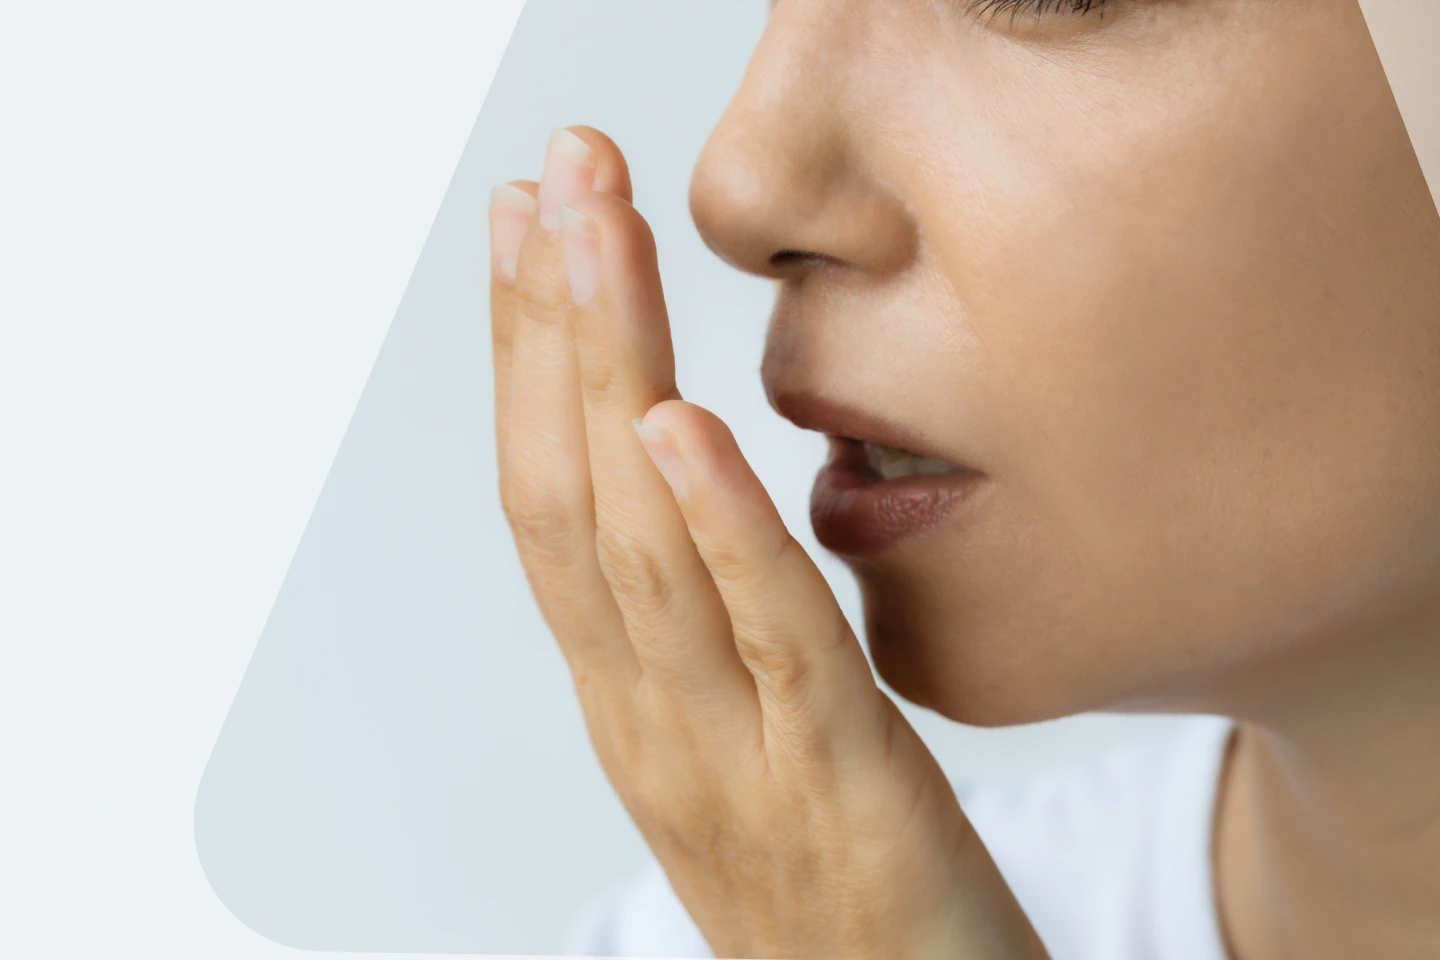 Image of a young woman discreetly checking her breath with hand over mouth. Addressing self-awareness and concern about potential bad breath.